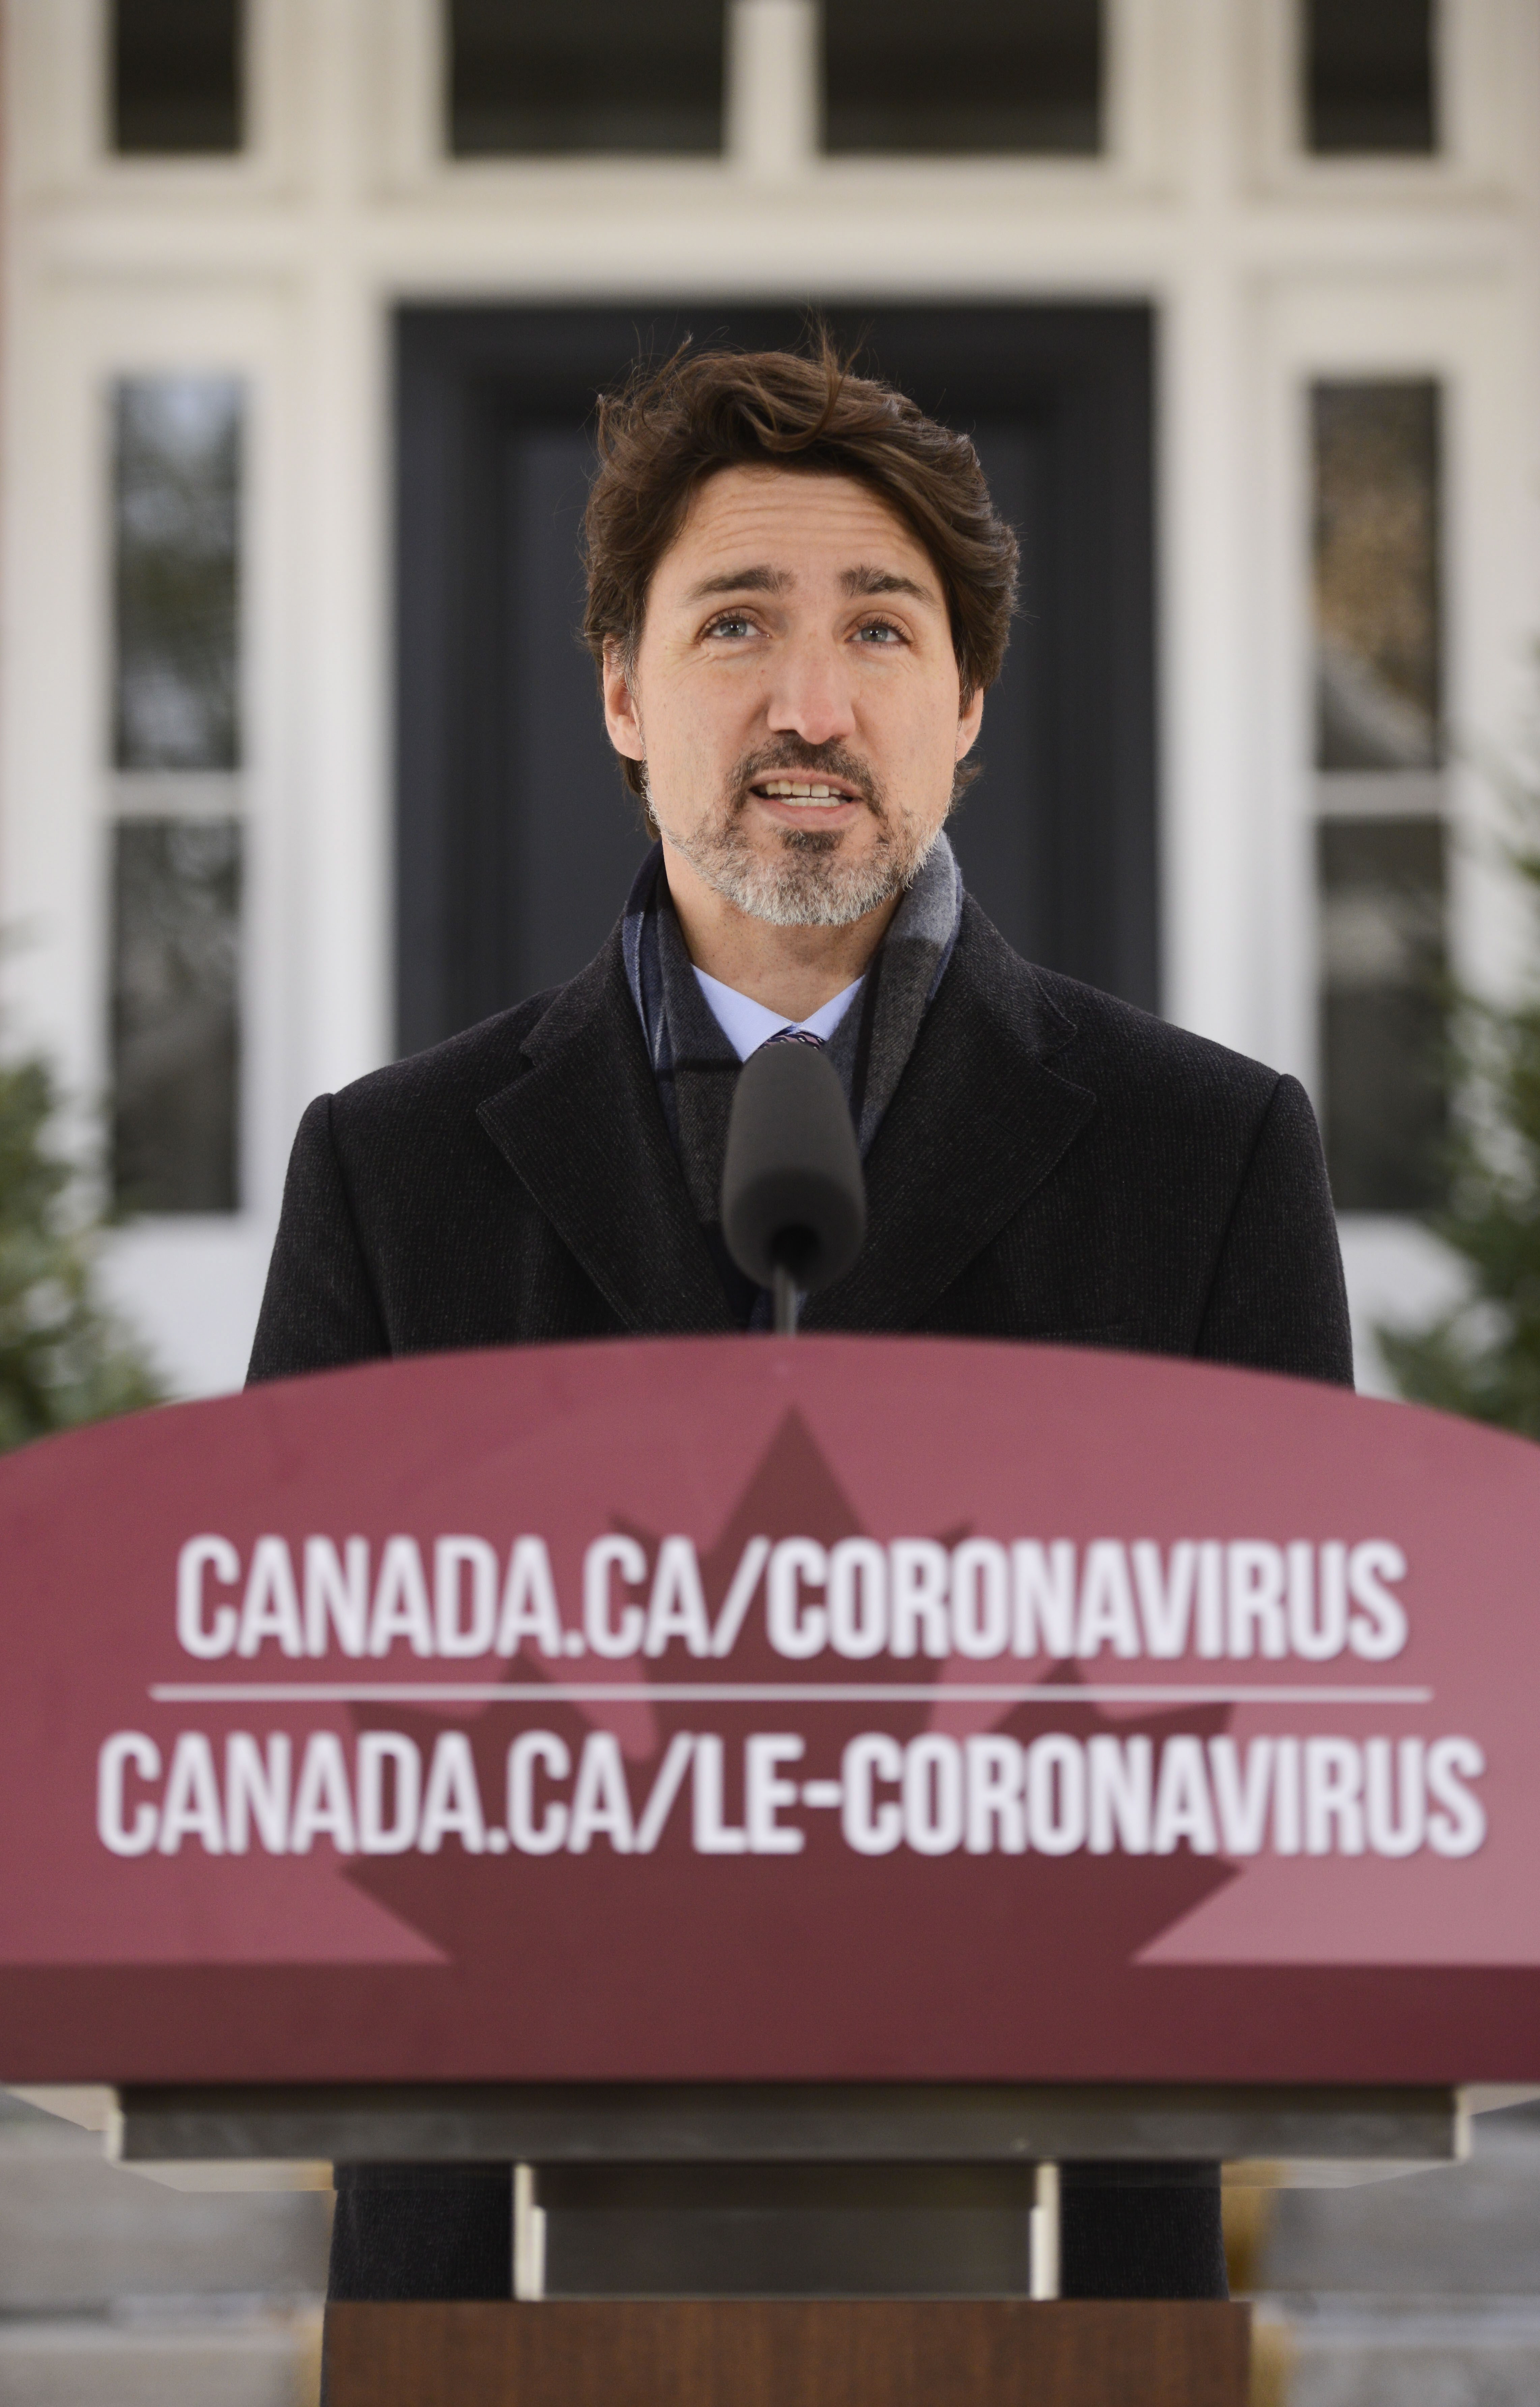 Prime Minister Justin Trudeau addresses Canadians on the COVID-19 pandemic from Rideau Cottage in Ottawa on Thursday, April 16, 2020. THE CANADIAN PRESS/Sean Kilpatrick